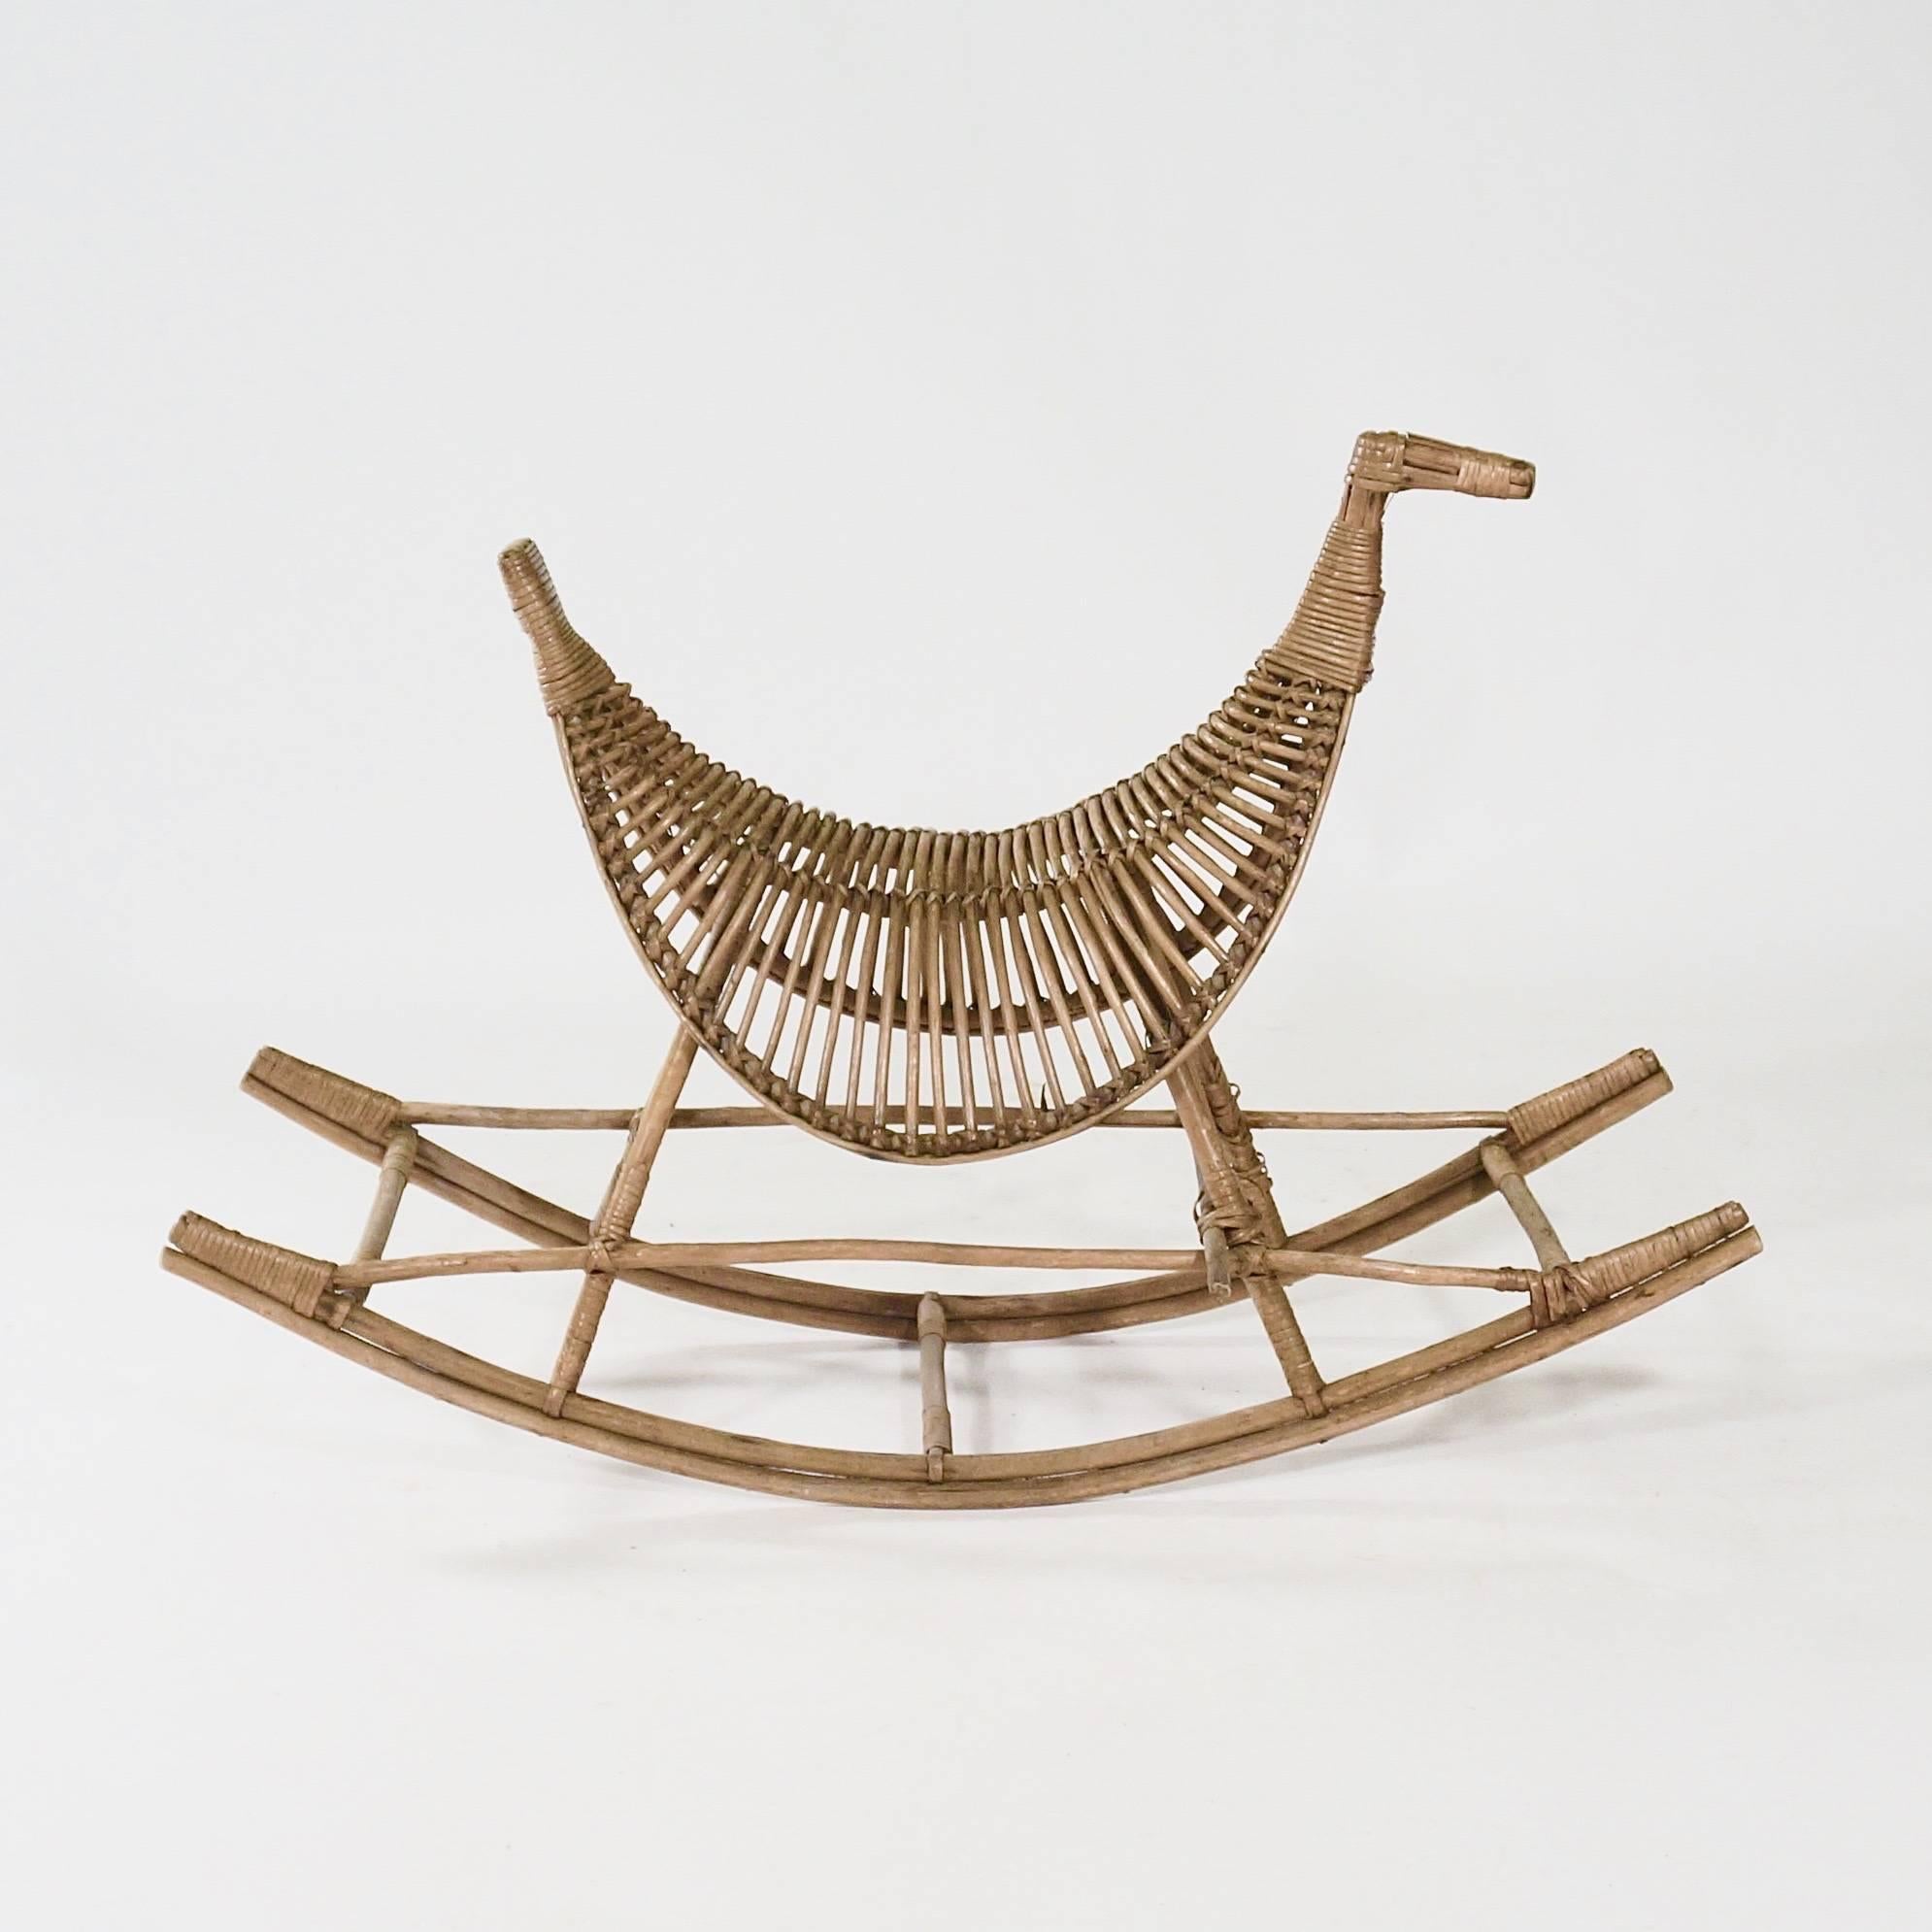 The bamboo body bound with rattan and supported by a rocking base,

Denmark, circa 1950s.